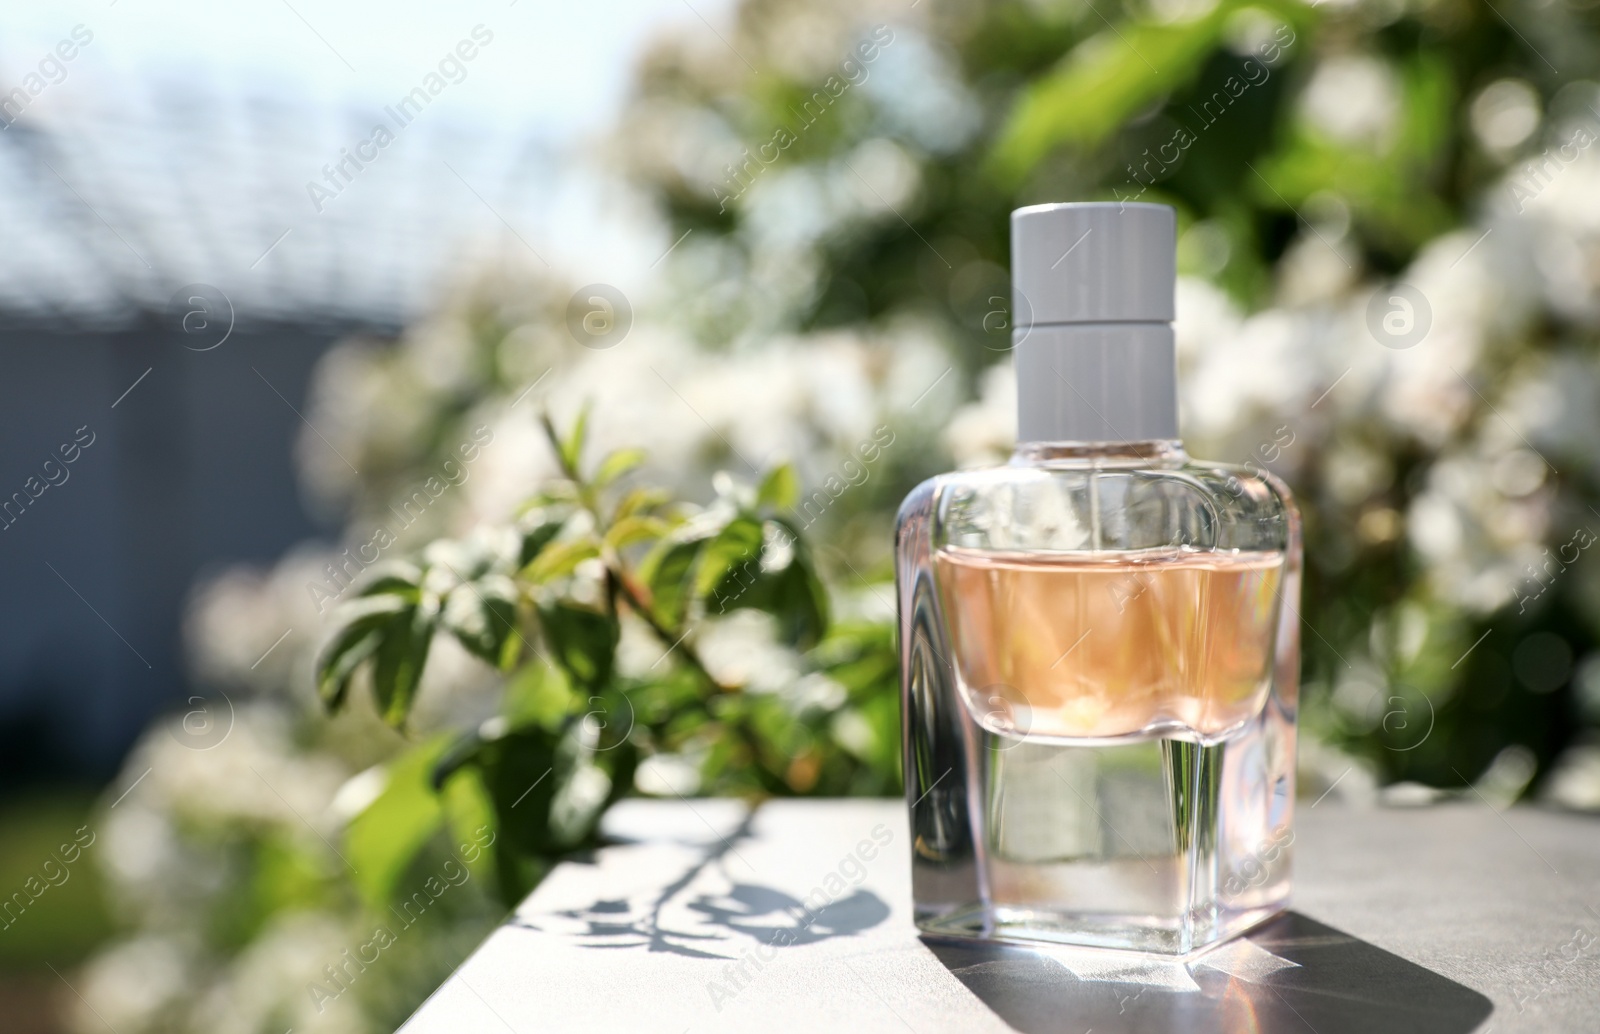 Photo of Bottle with luxury perfume on table in garden, space for text